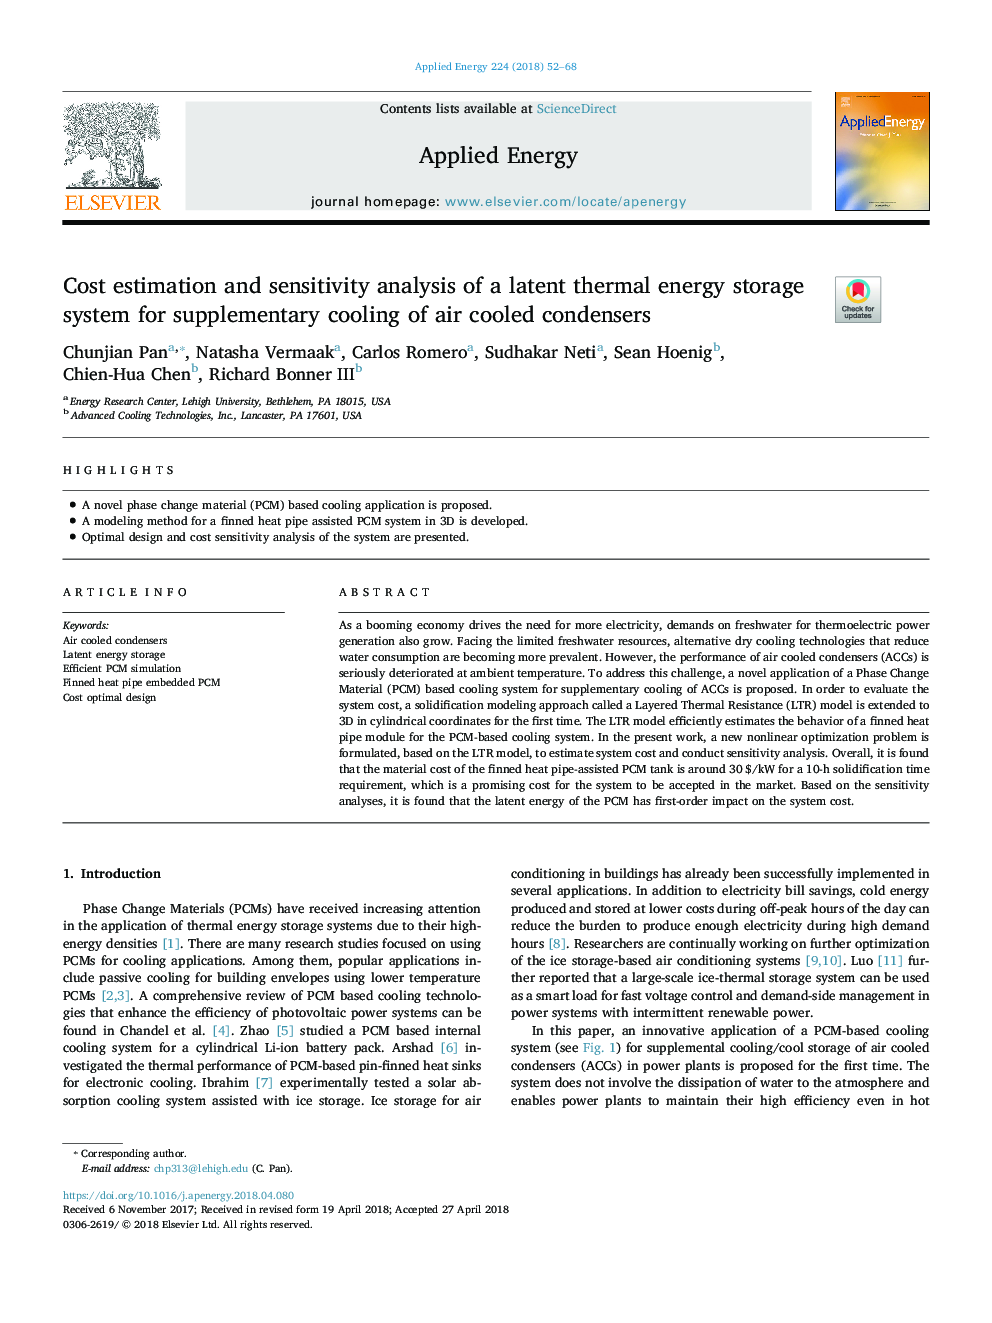 Cost estimation and sensitivity analysis of a latent thermal energy storage system for supplementary cooling of air cooled condensers